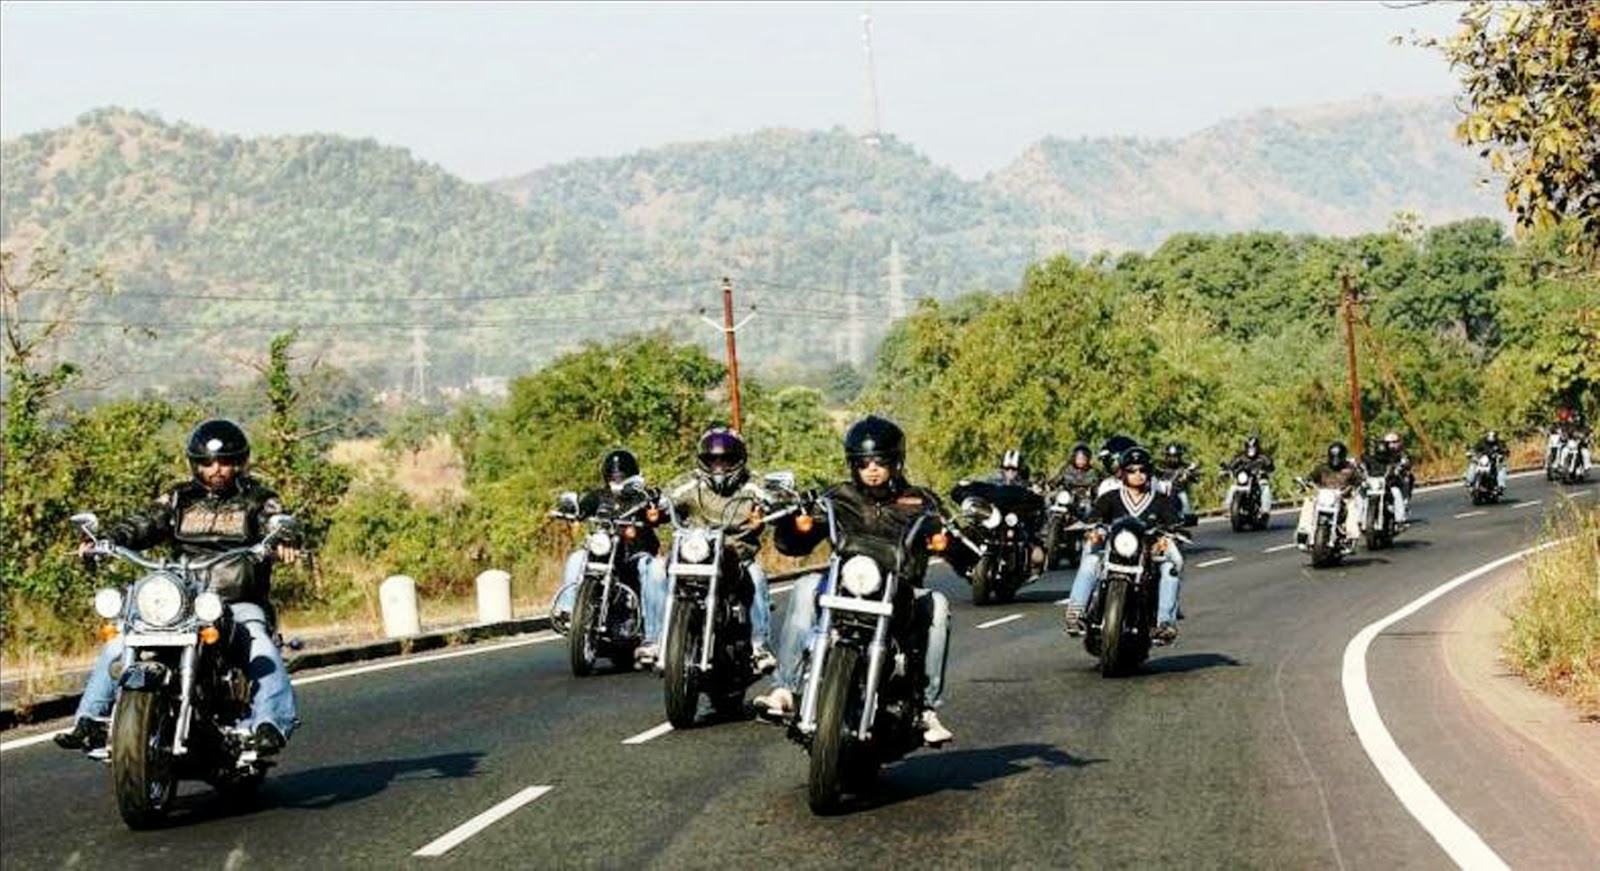 Harley Owners Group Ride